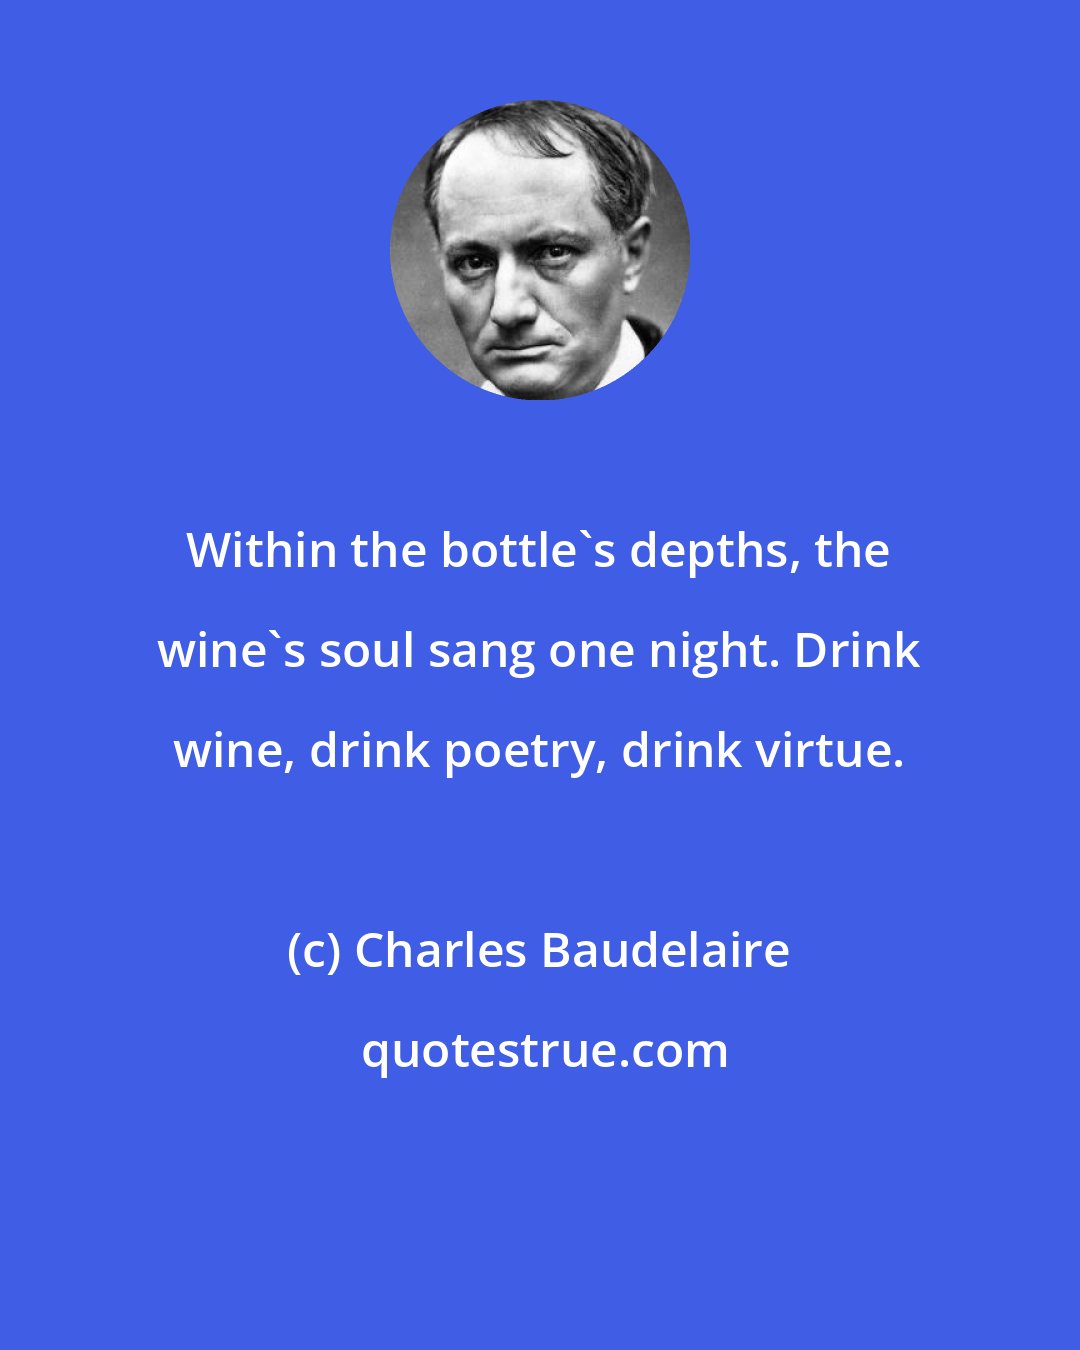 Charles Baudelaire: Within the bottle's depths, the wine's soul sang one night. Drink wine, drink poetry, drink virtue.